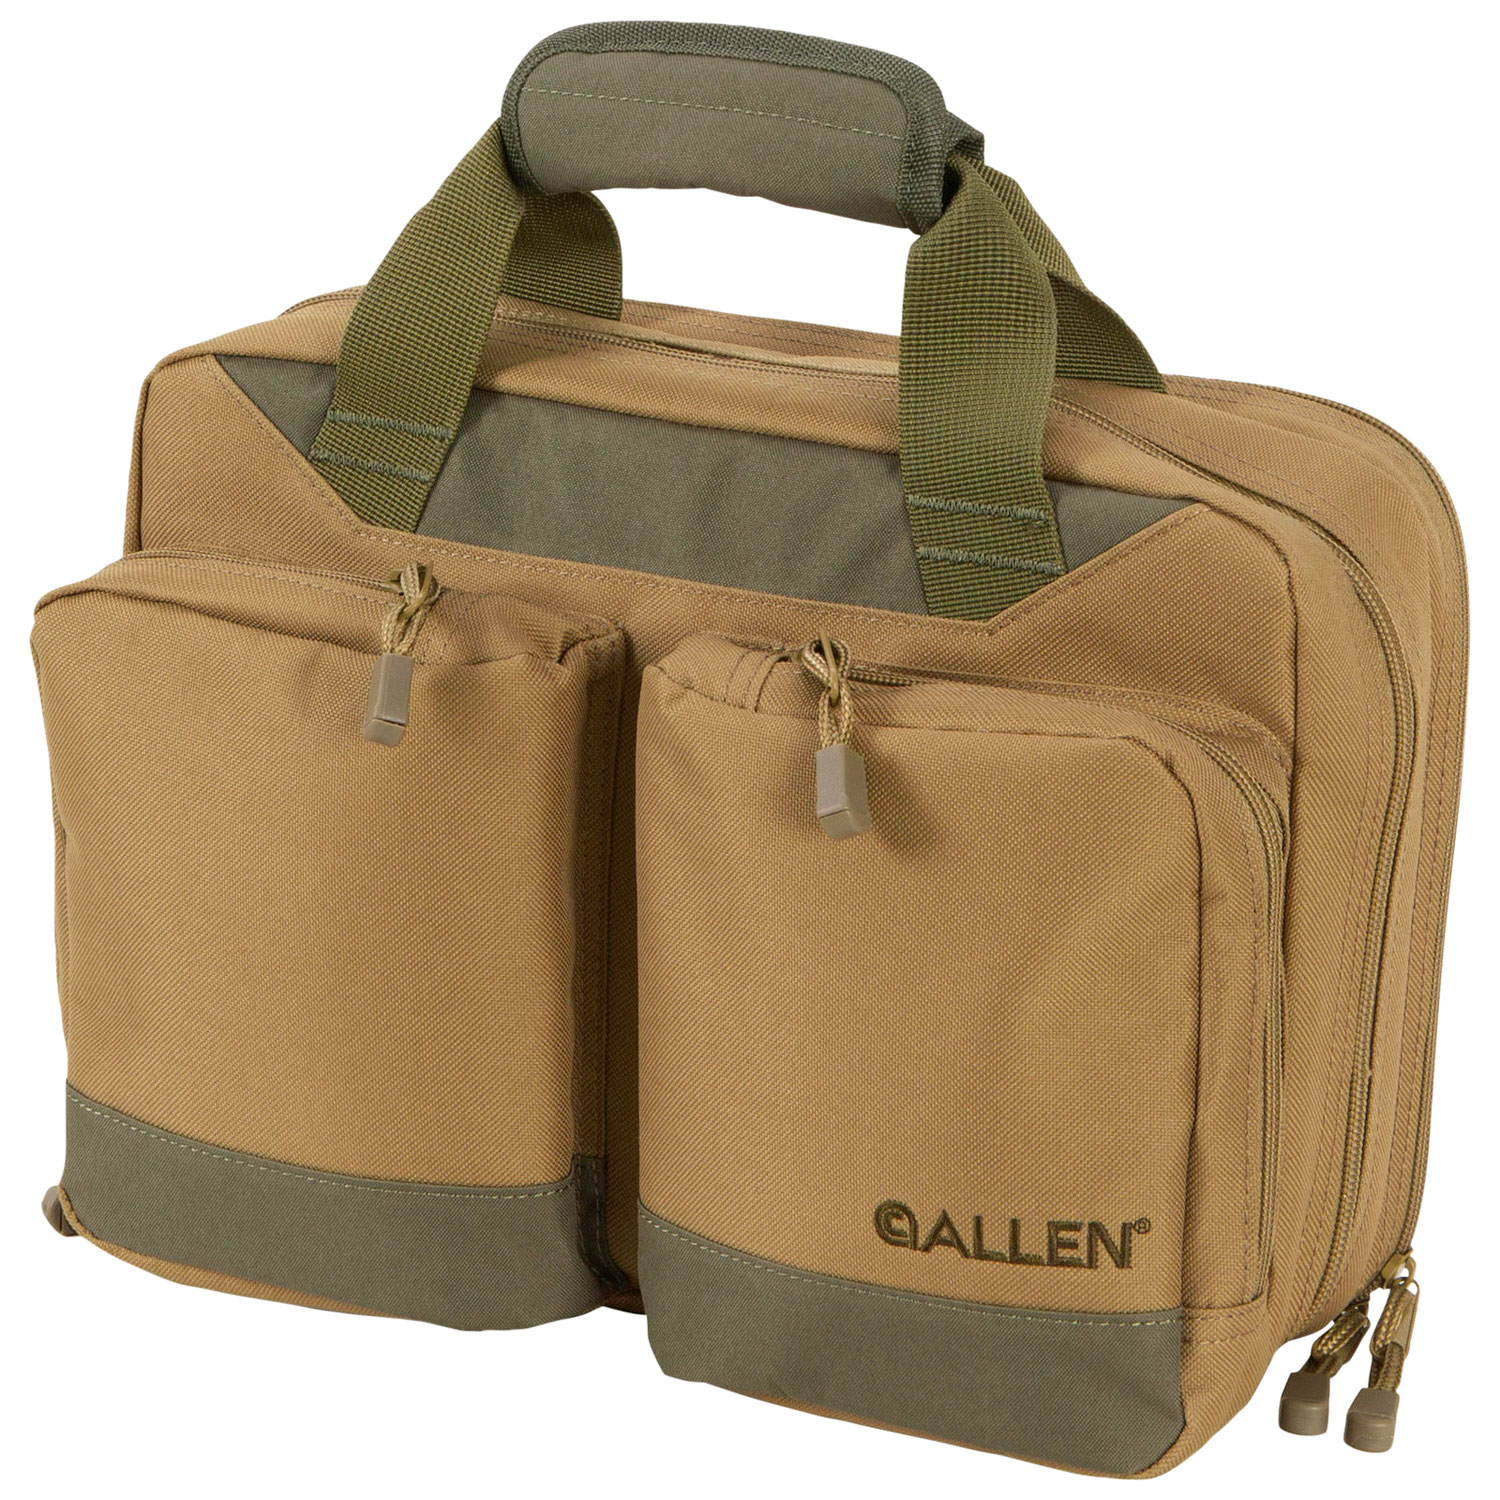 Allen 7603 Double Handgun Attache Case Tan w/Olive Accents, 2 Padded Sleeve Pockets, 8 Mag Sleeves, Pockets for Ammo & Accessories & Foldout Shooting Mat Holds up to 2 Handguns